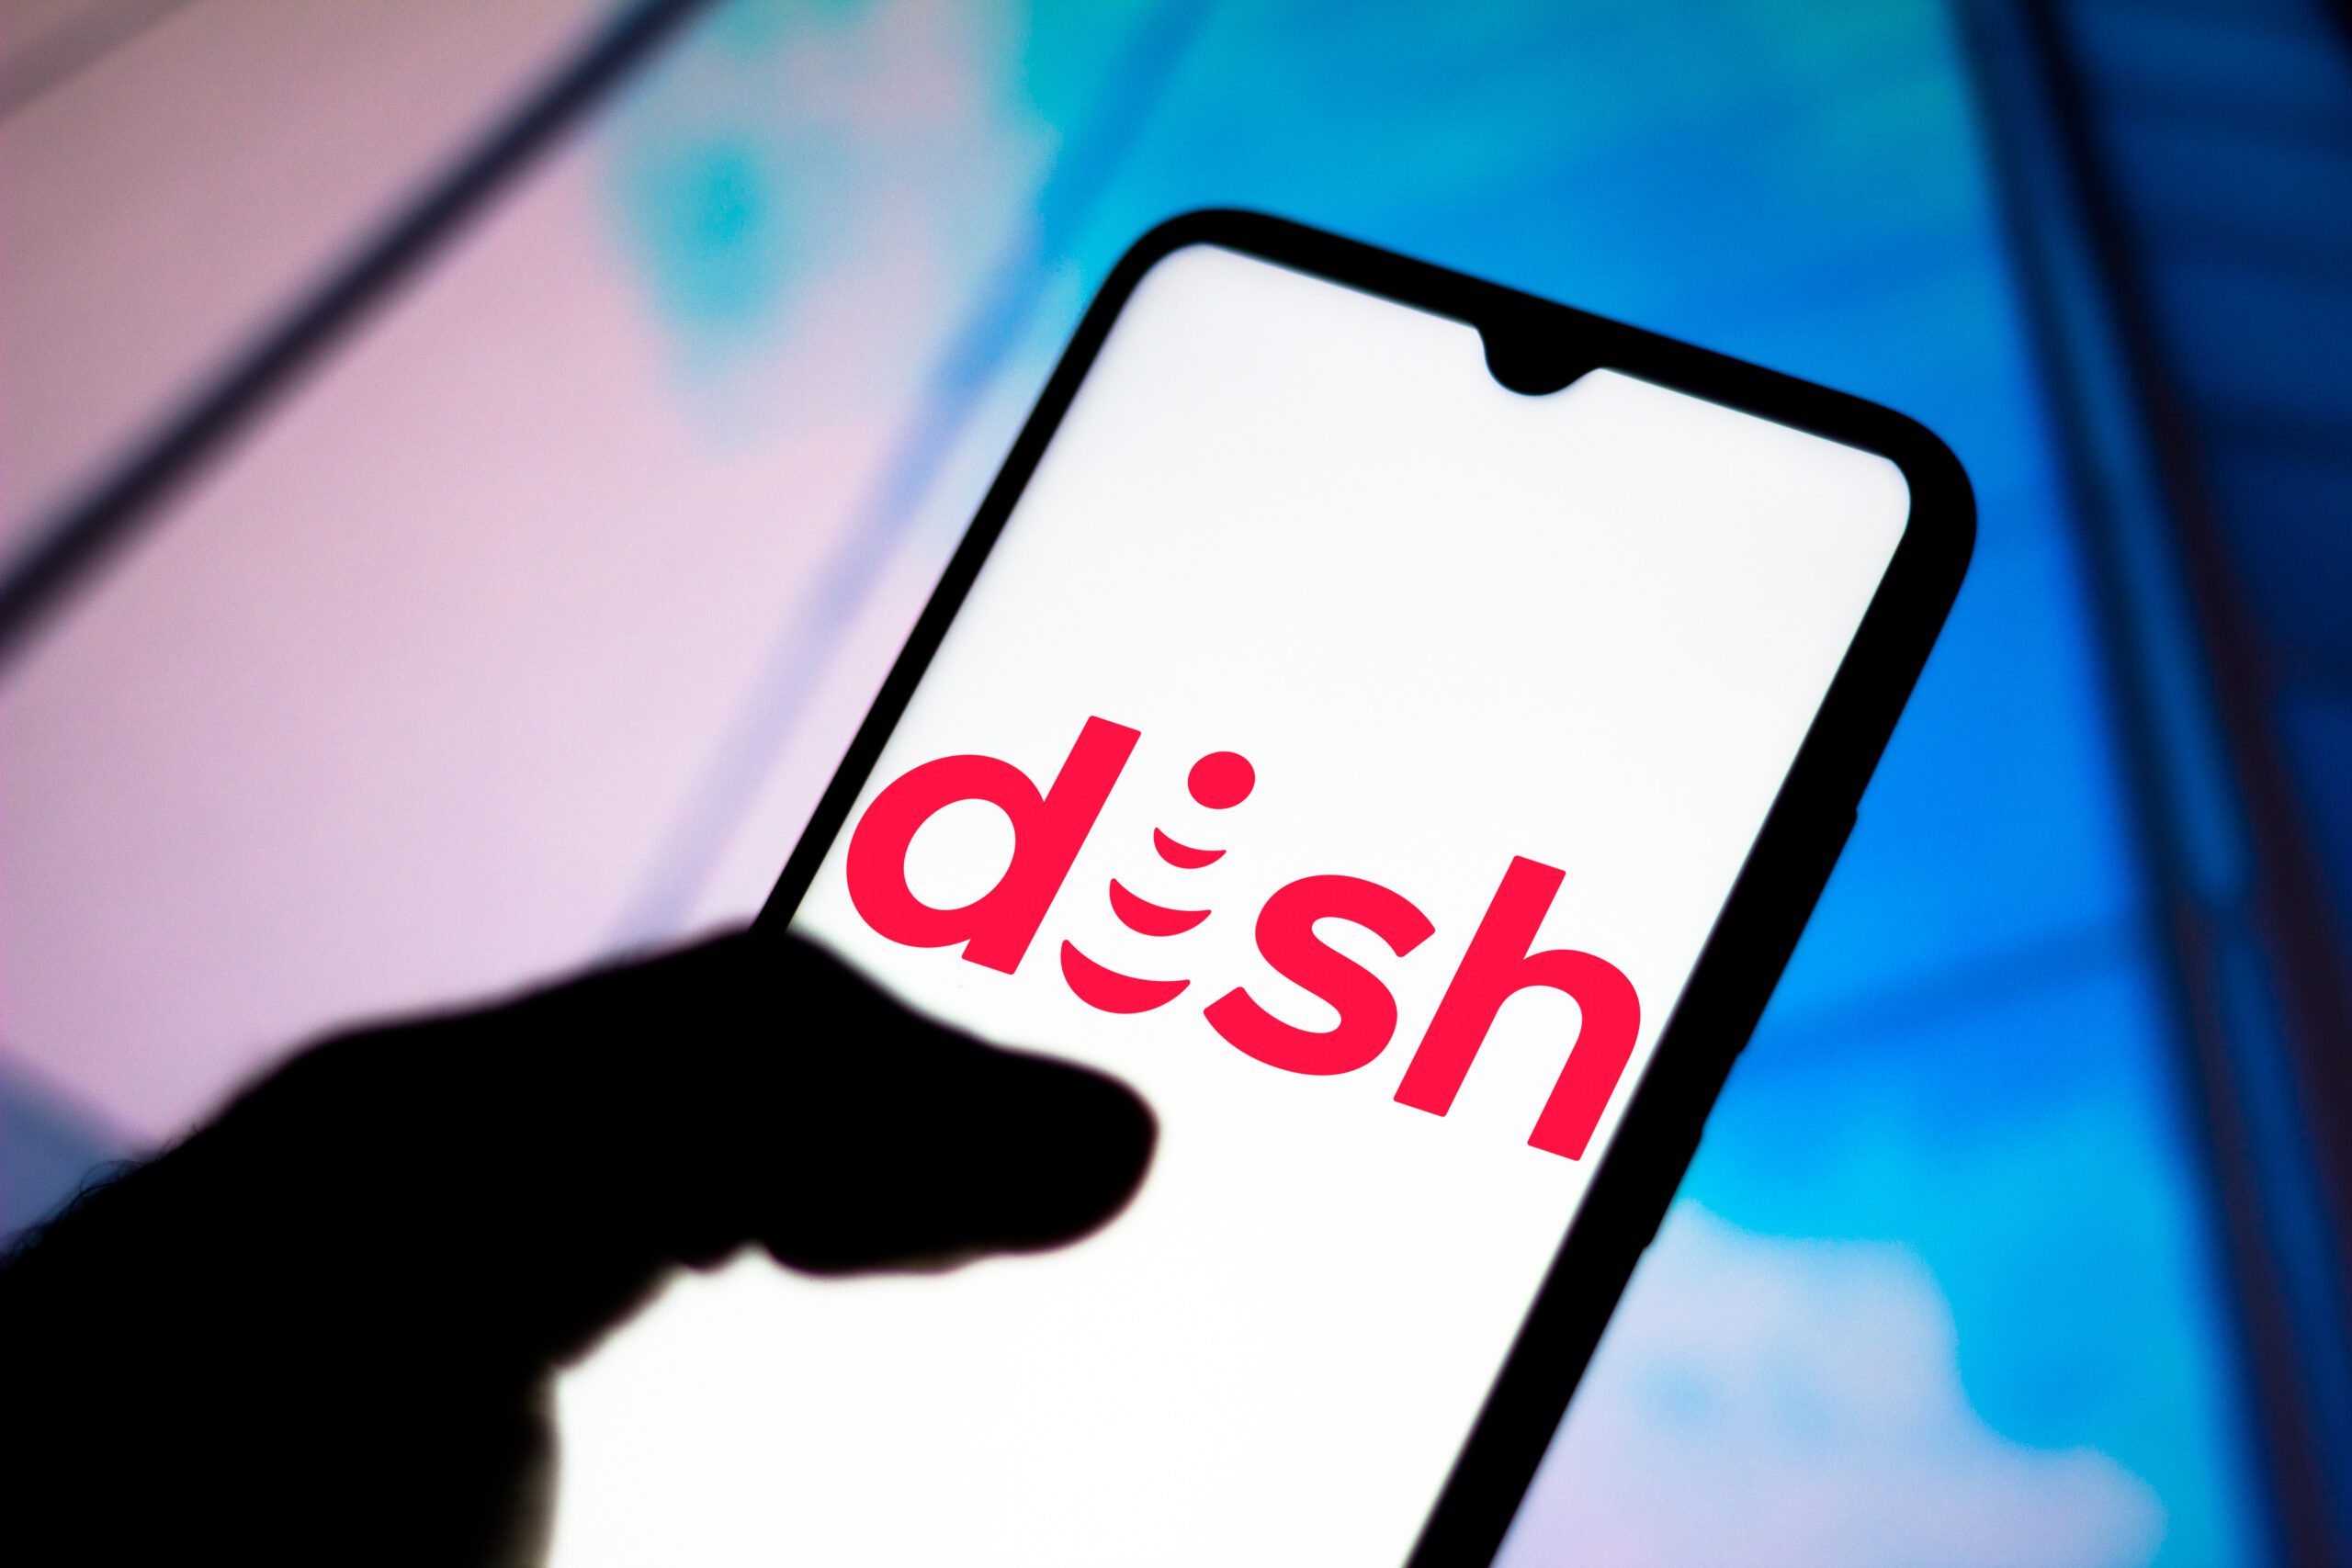 Dish Network’s Wireless Retail Chief Quits, Raising More Questions About its Mobile Business